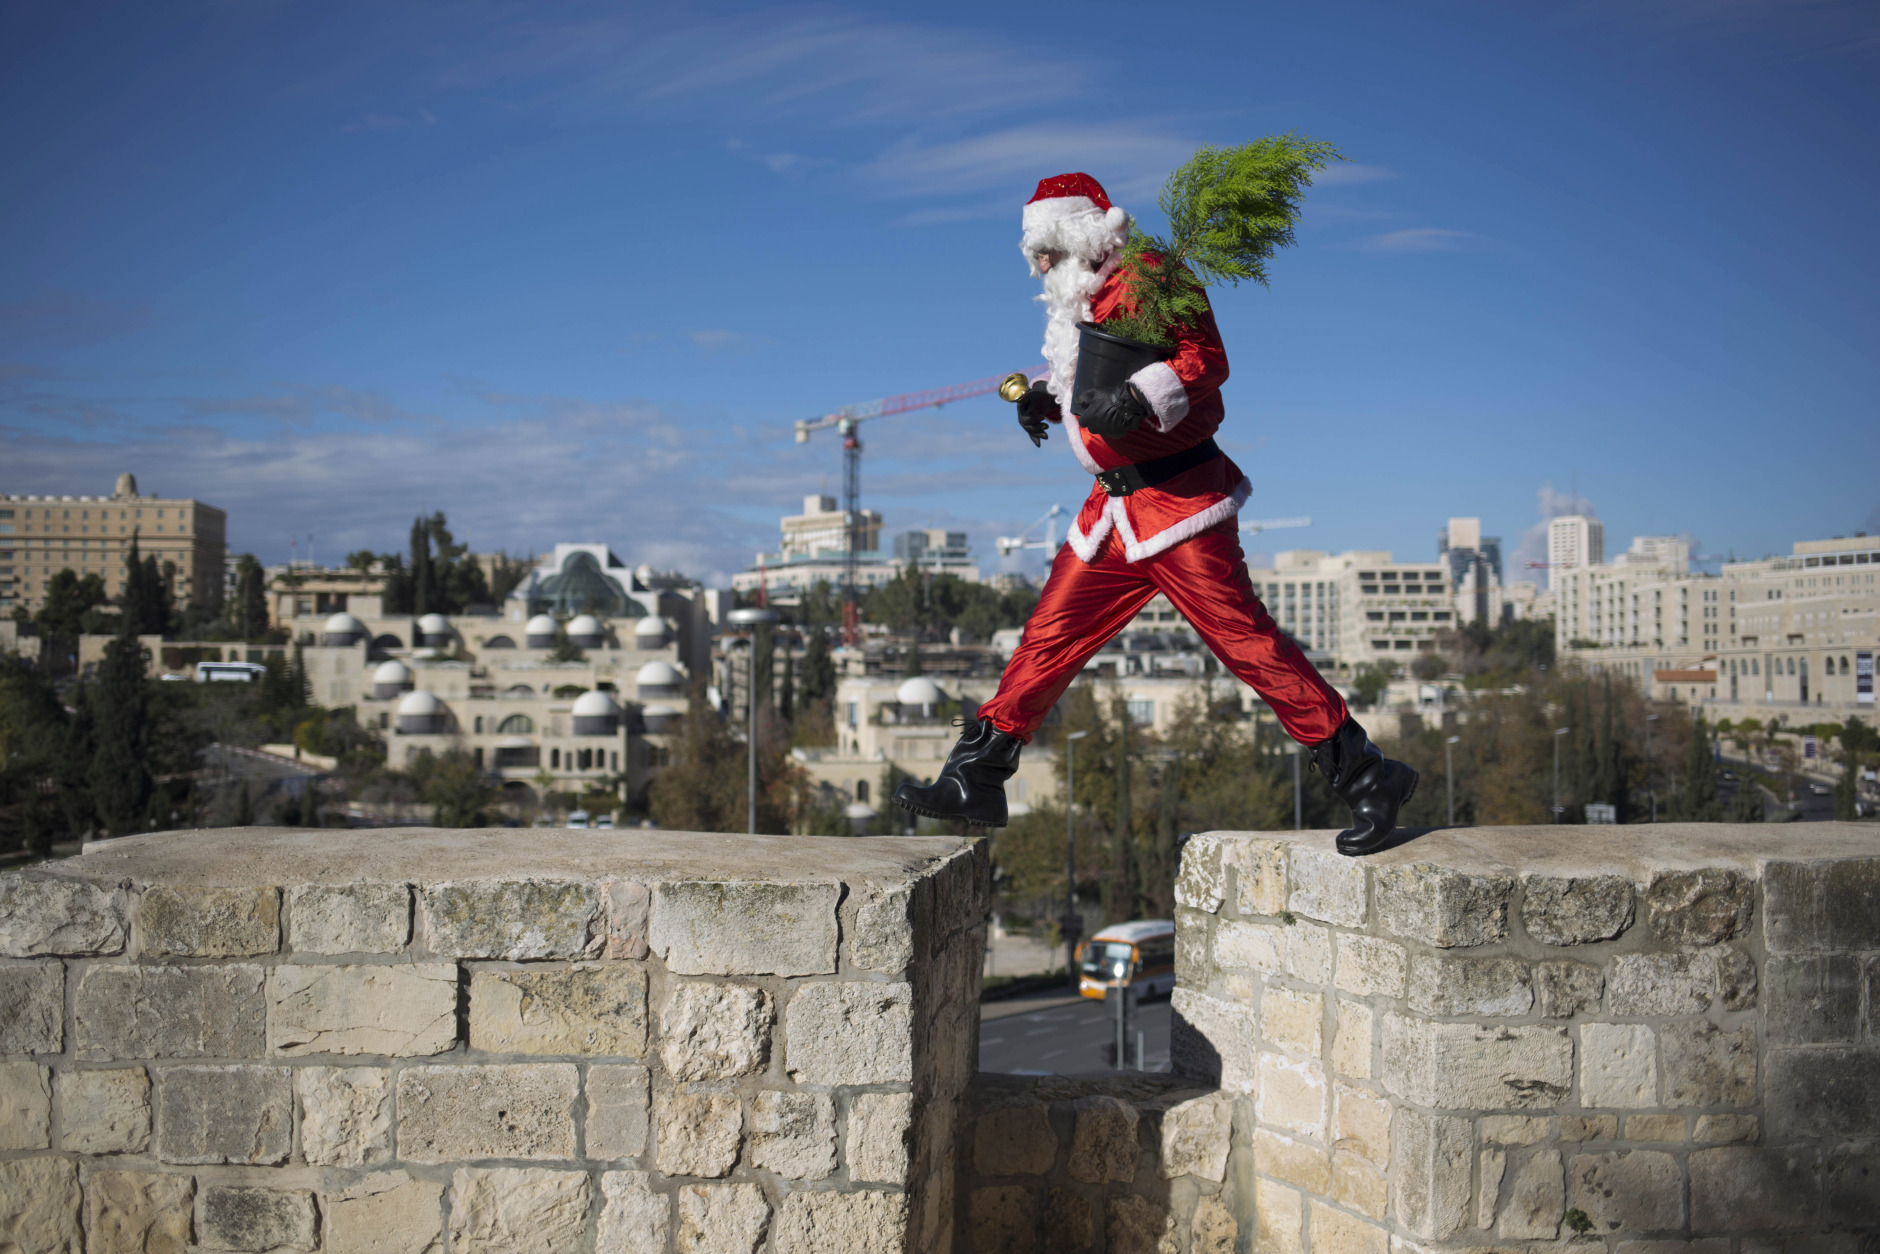 A man dressed as Santa Claus walks on the wall of the Old City in Jerusalem Monday, Dec. 22, 2014. (AP Photo/Dusan Vranic)